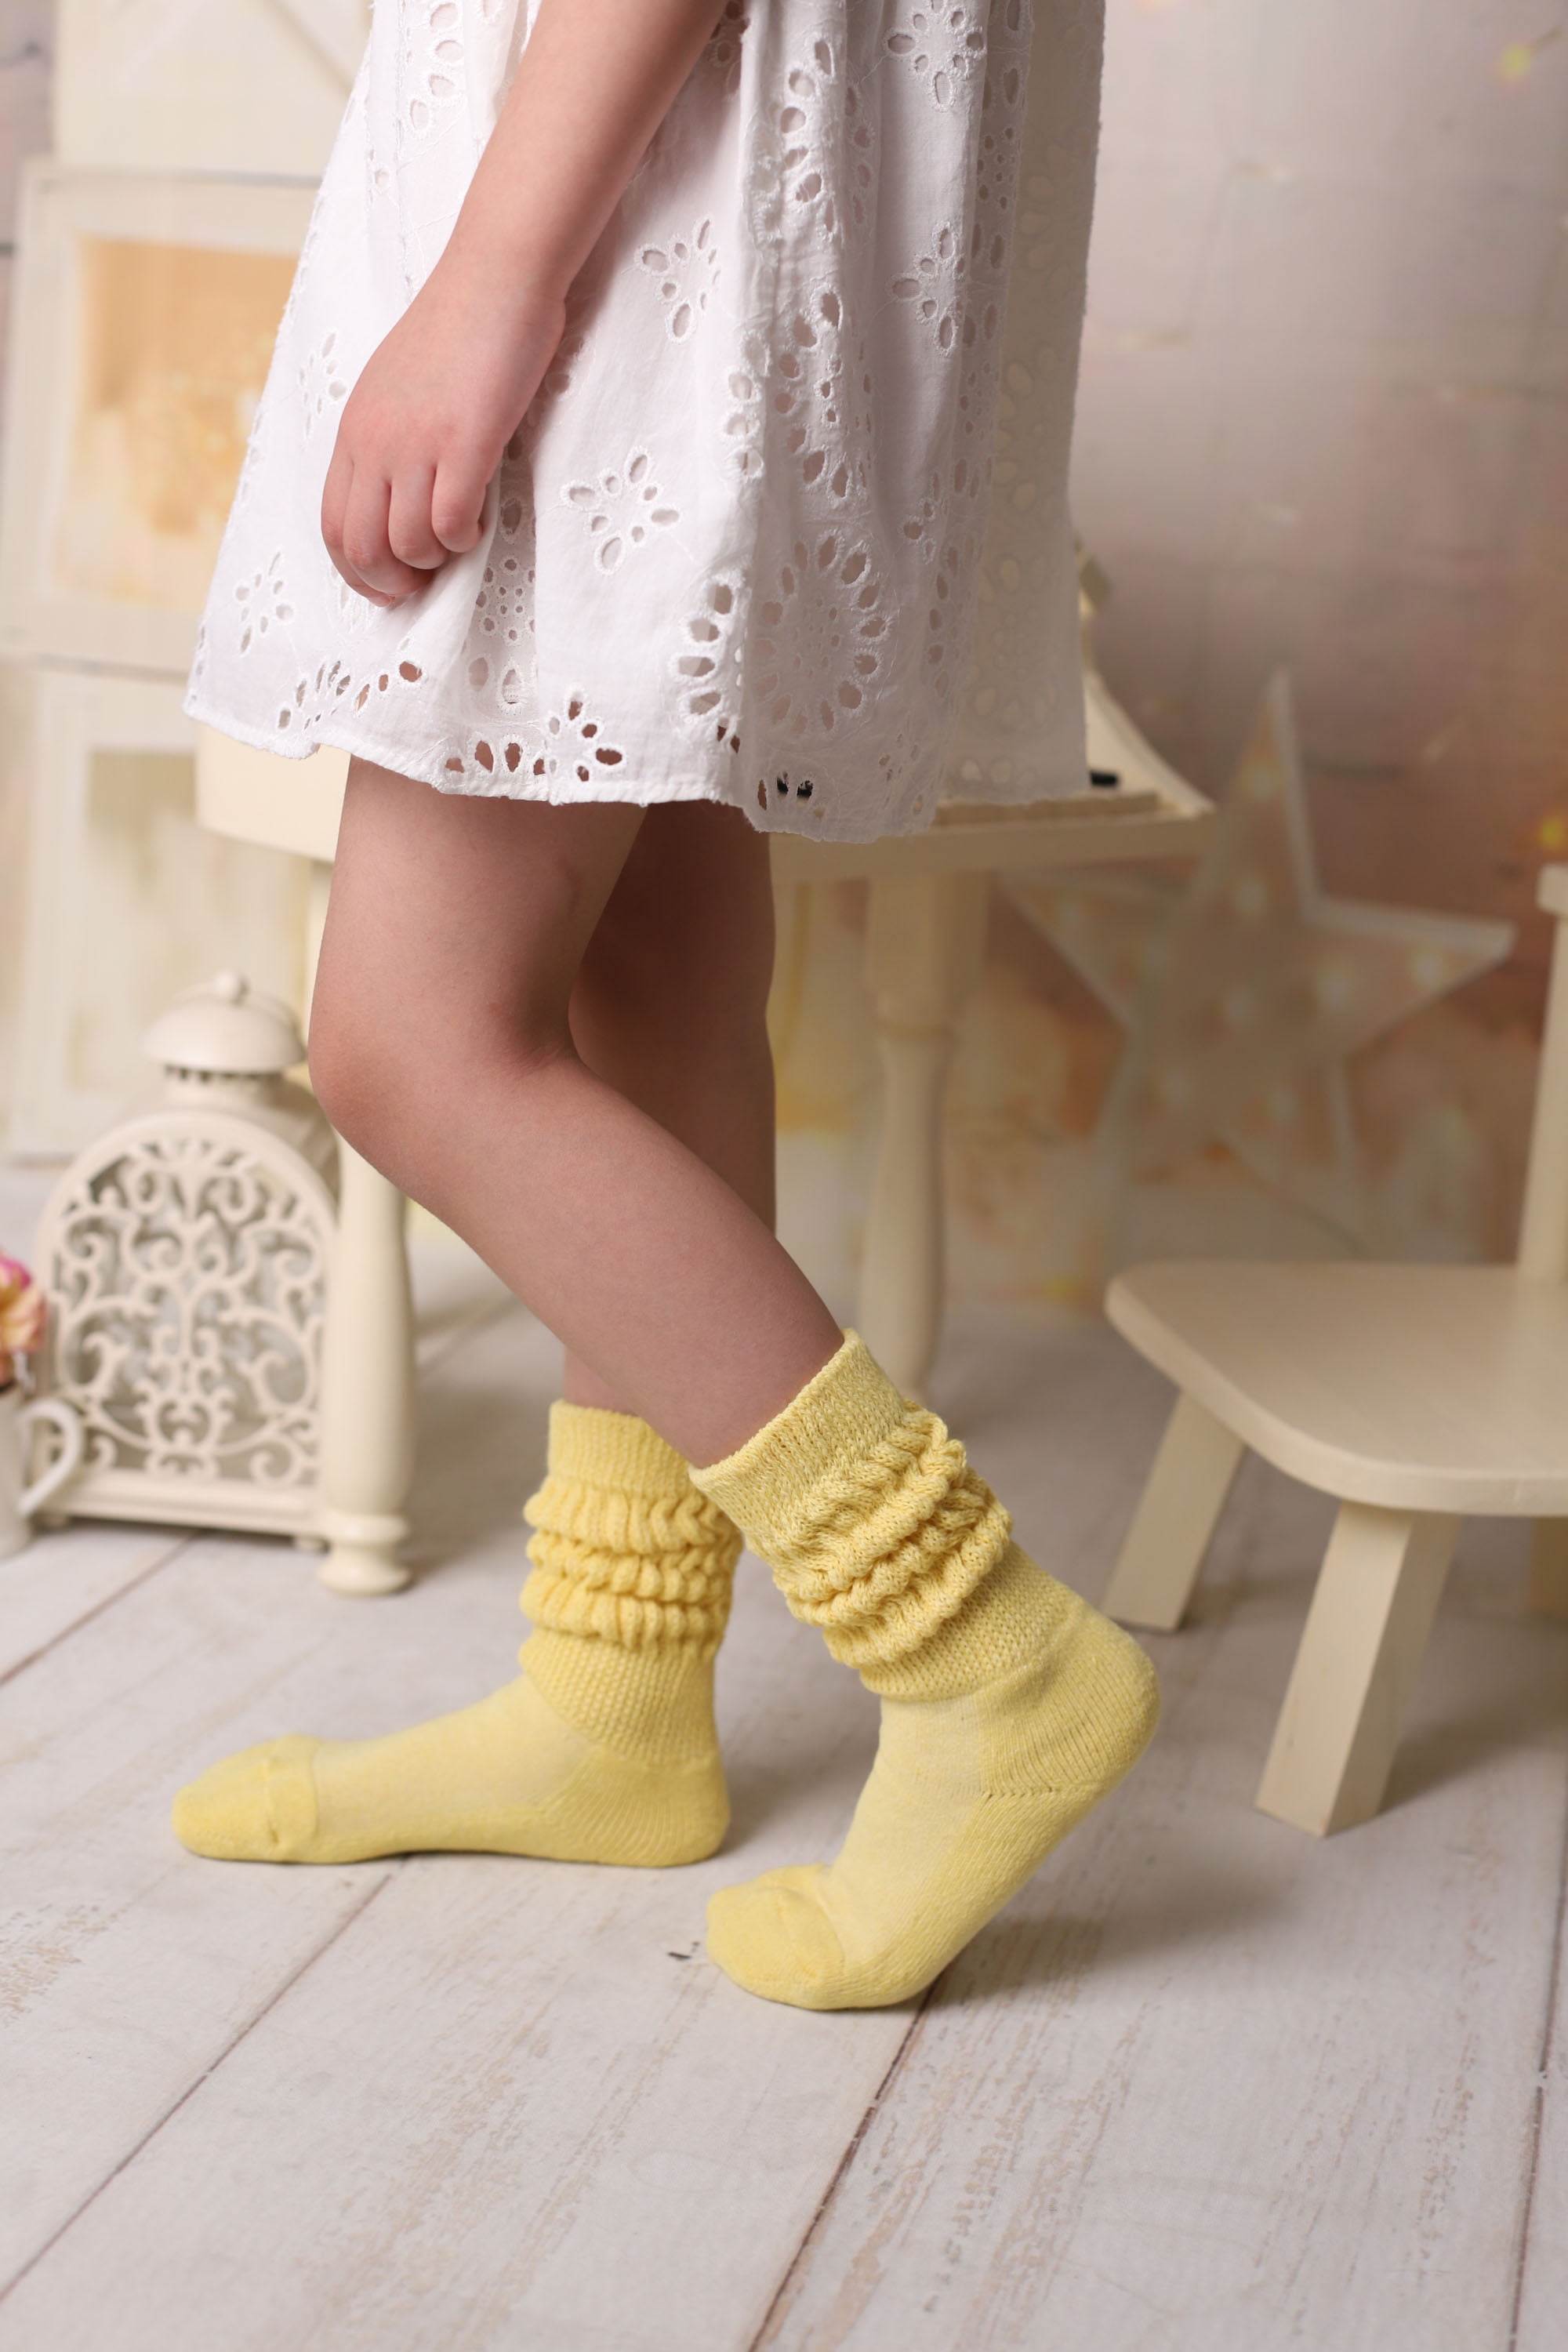 Cotton Slouch Socks for Boys and Girls Limone 3 Pairs 6-8 Years Old 